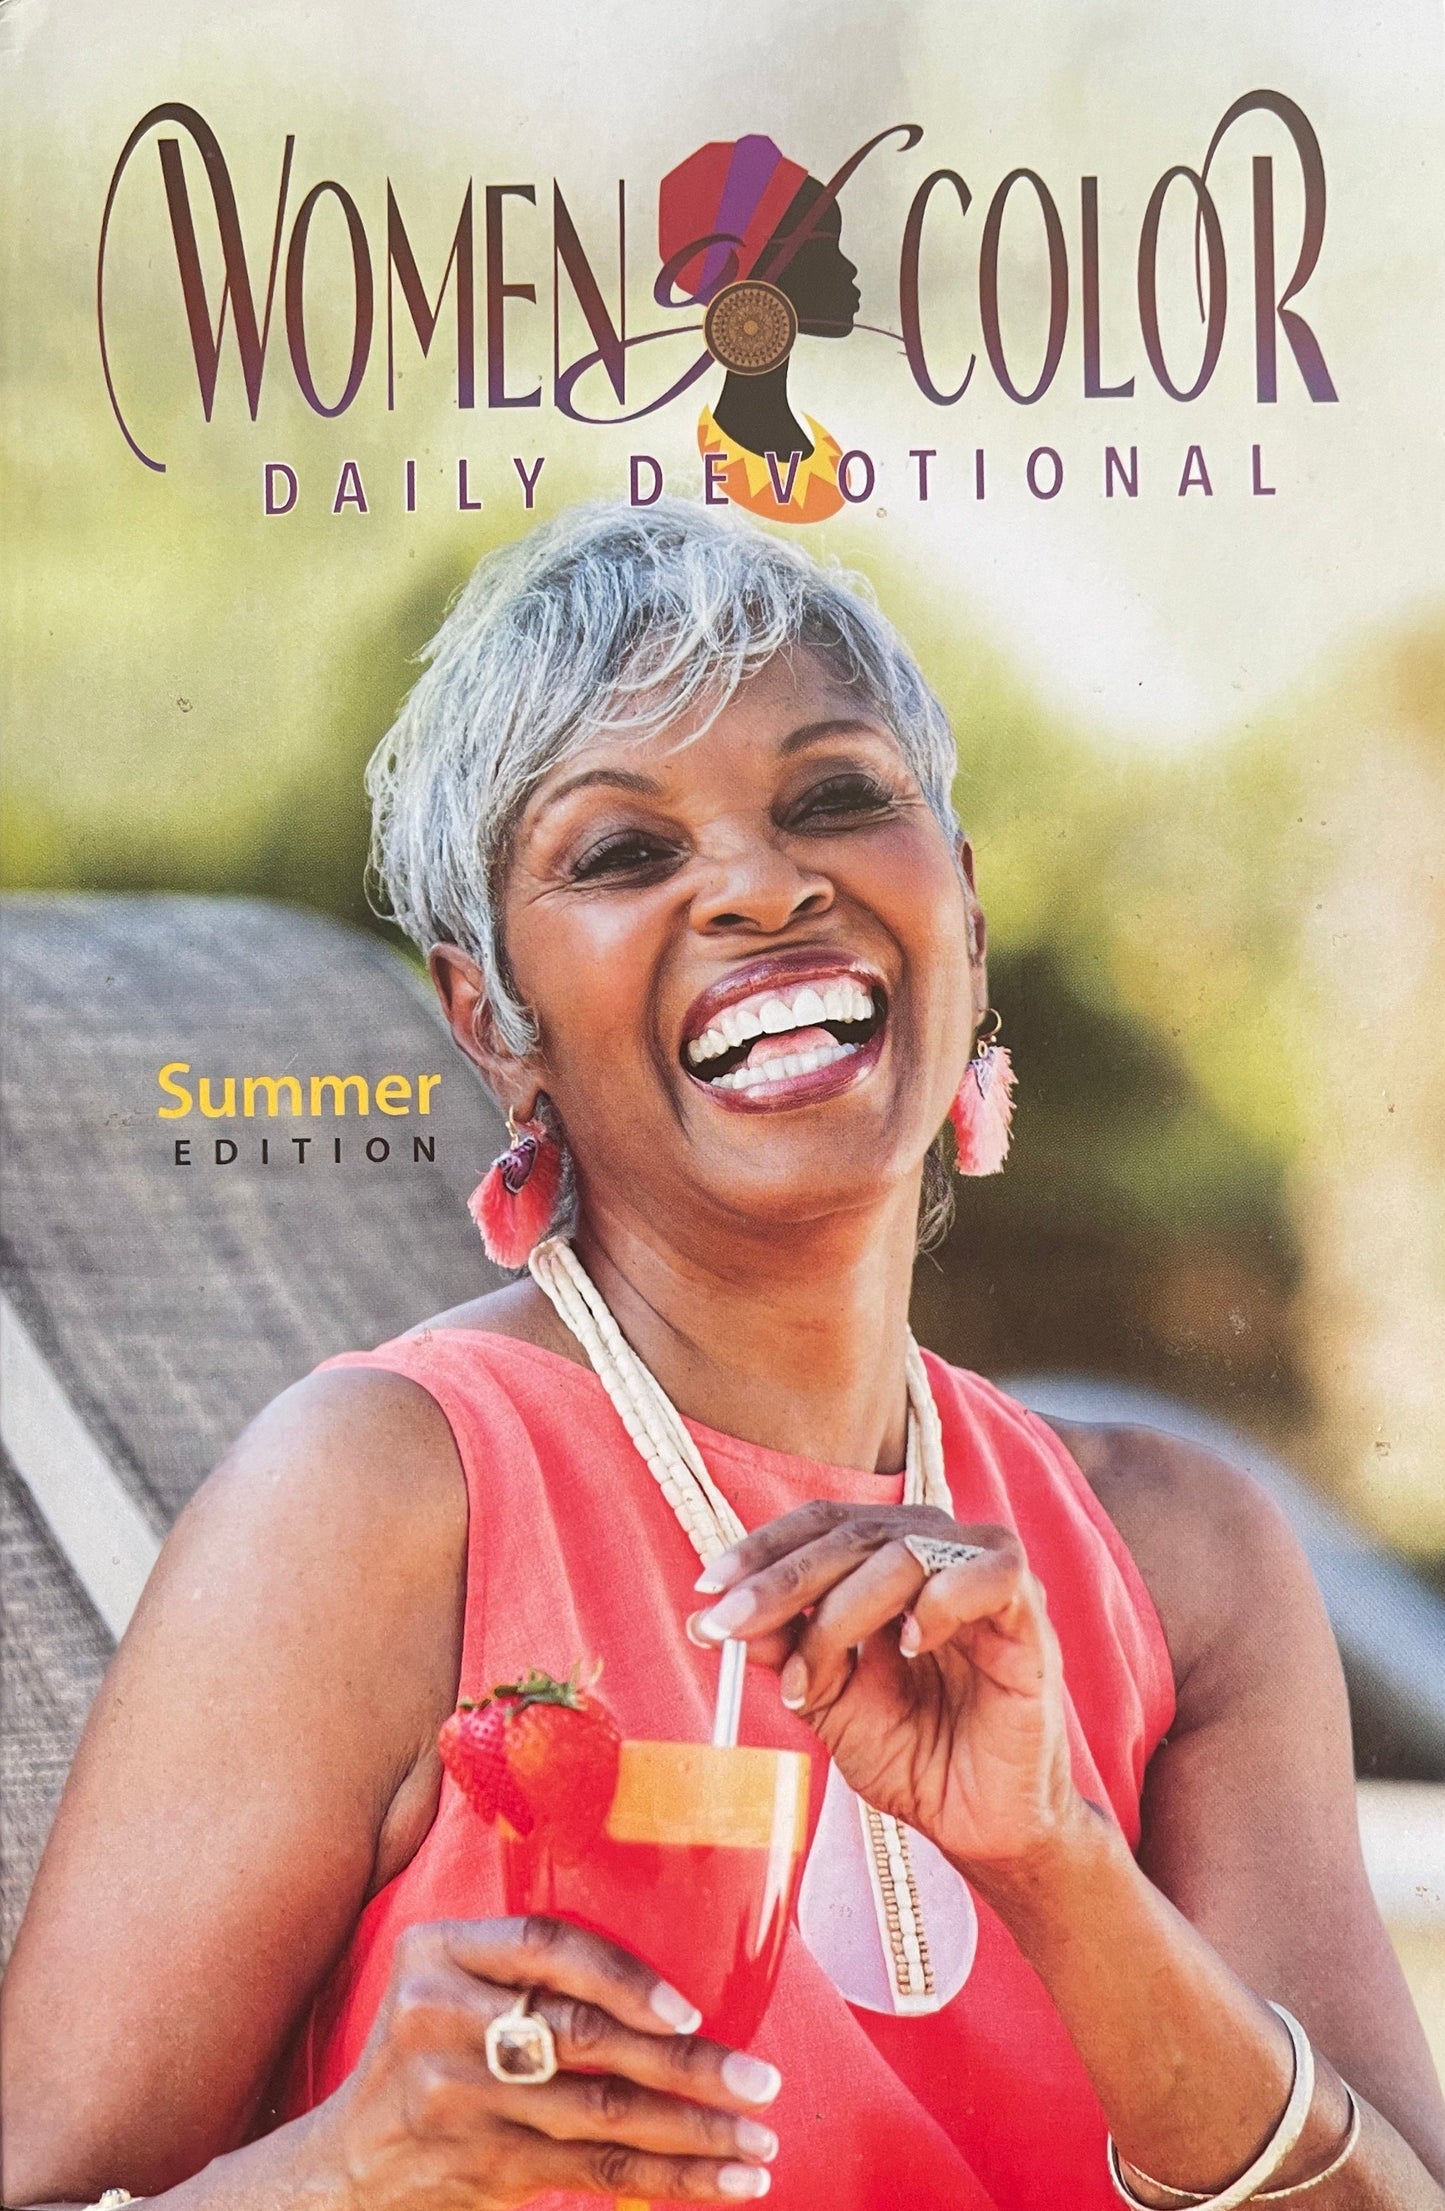 ALL of the Women of Color Daily Devotionals in one Set x10